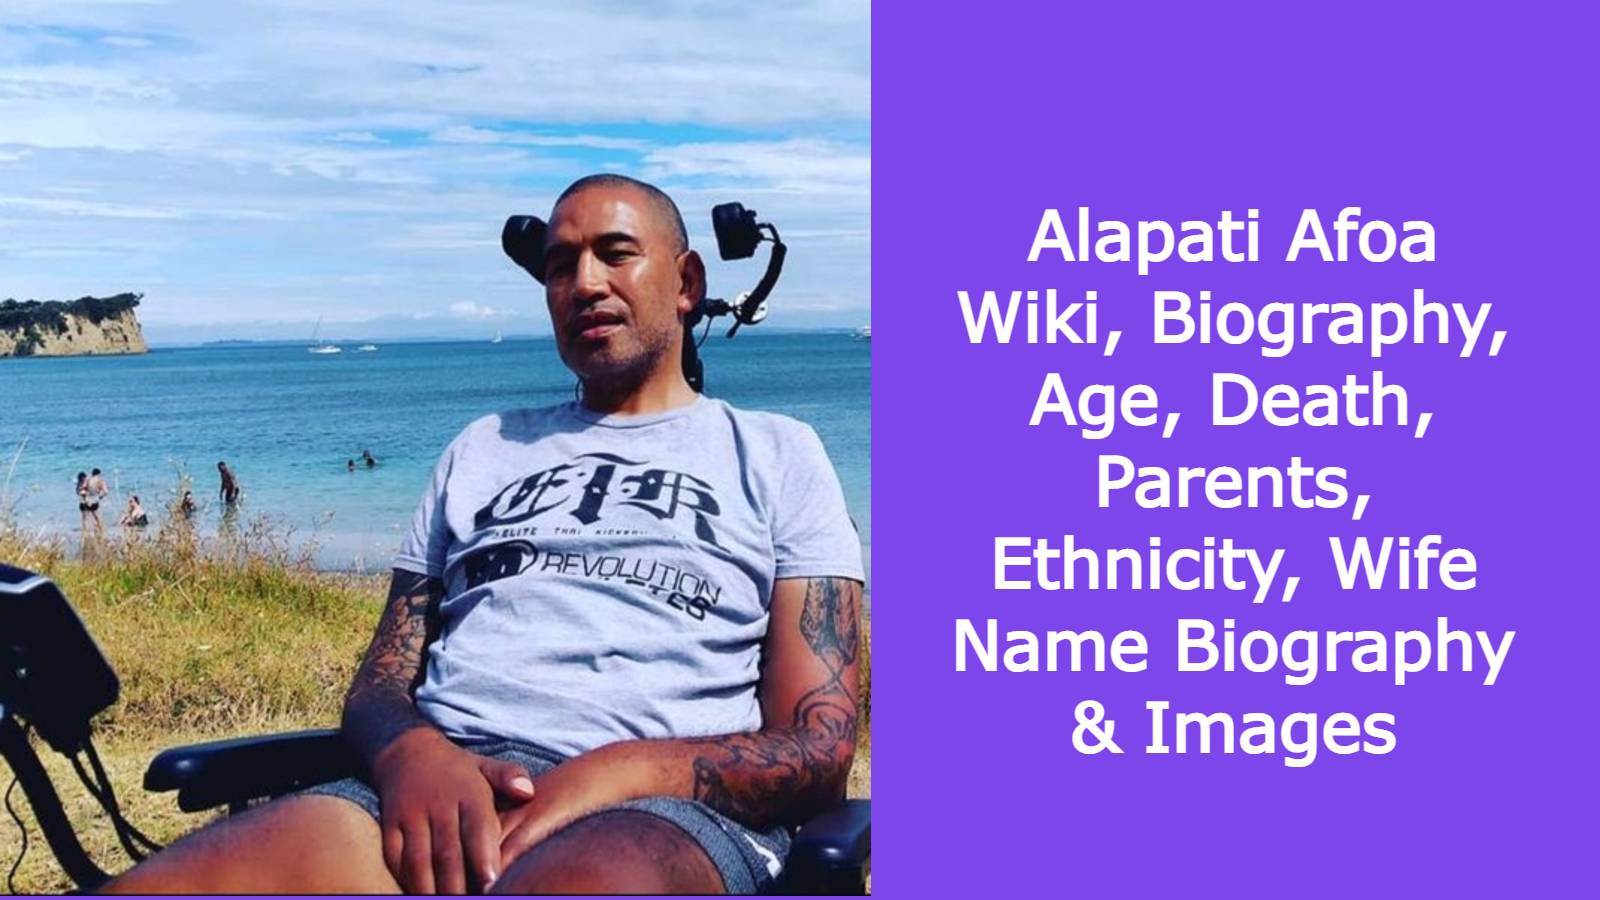 Alapati Afoa Wiki, Biography, Age, Death, Parents, Ethnicity, Wife Name Biography & Images